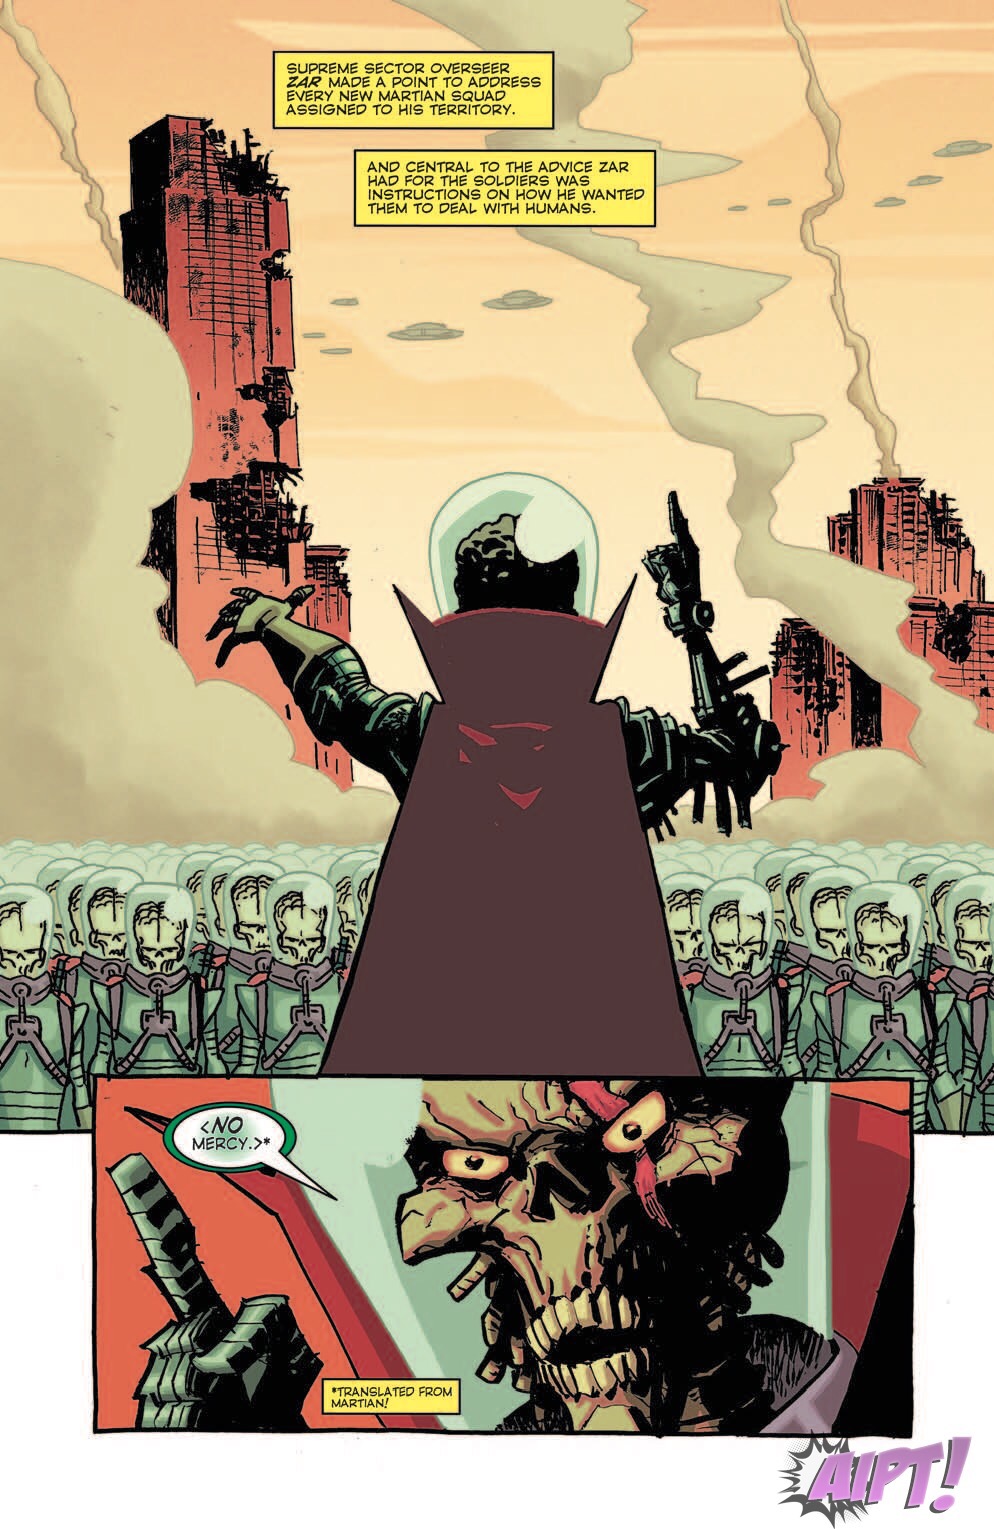 [EXCLUSIVE] IDW Preview: Mars Attacks: Occupation #2